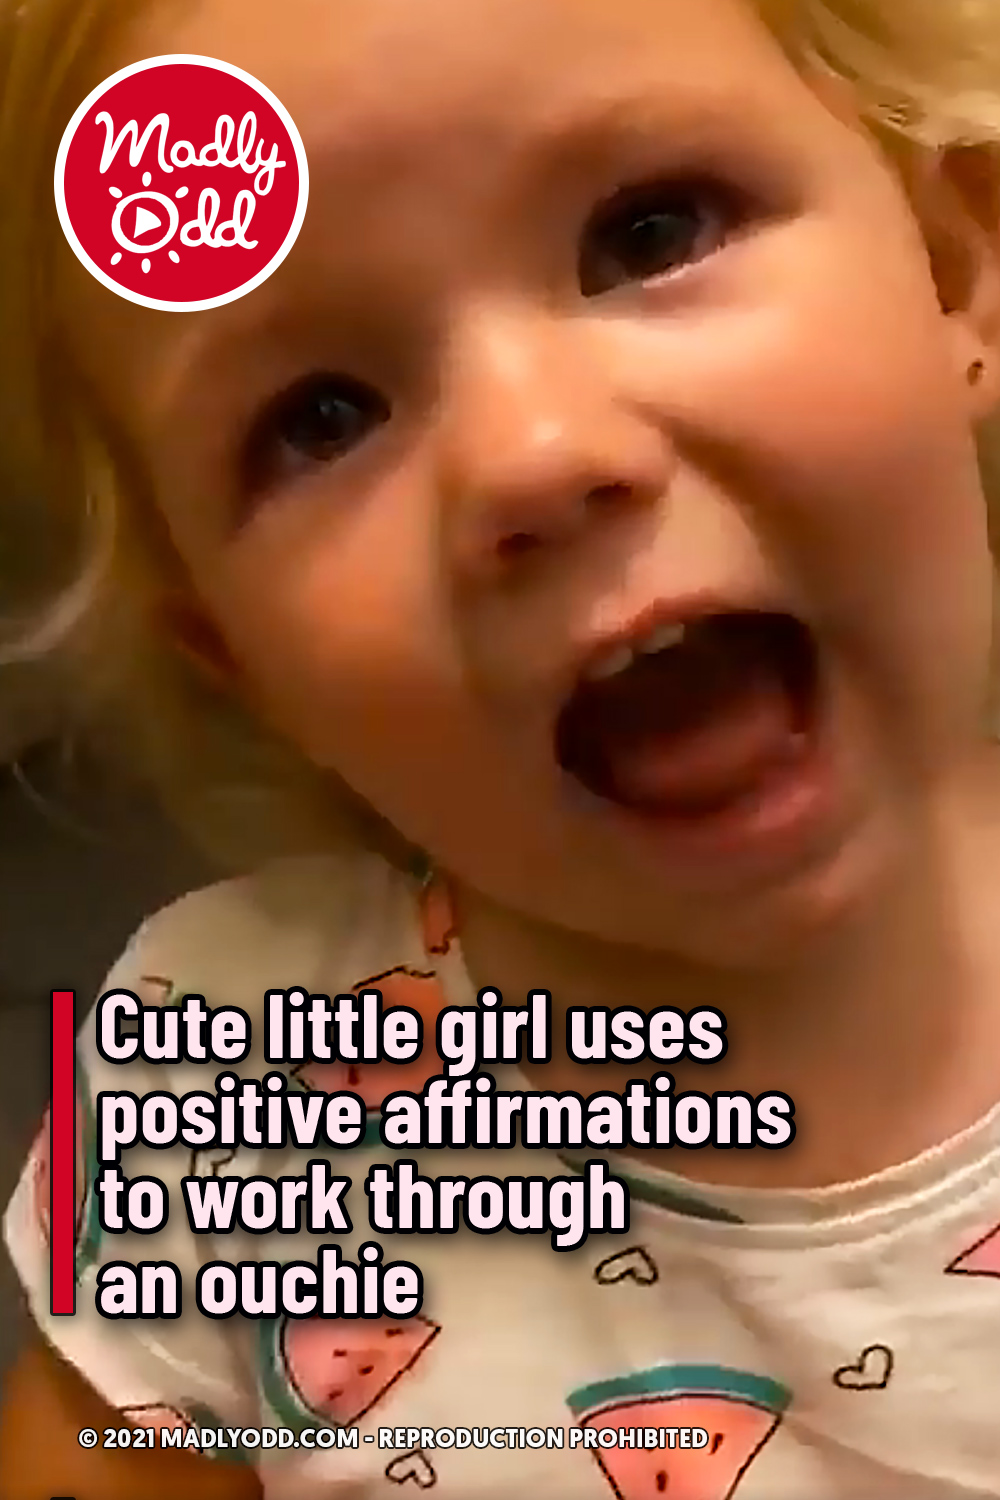 Cute little girl uses positive affirmations to work through an ouchie